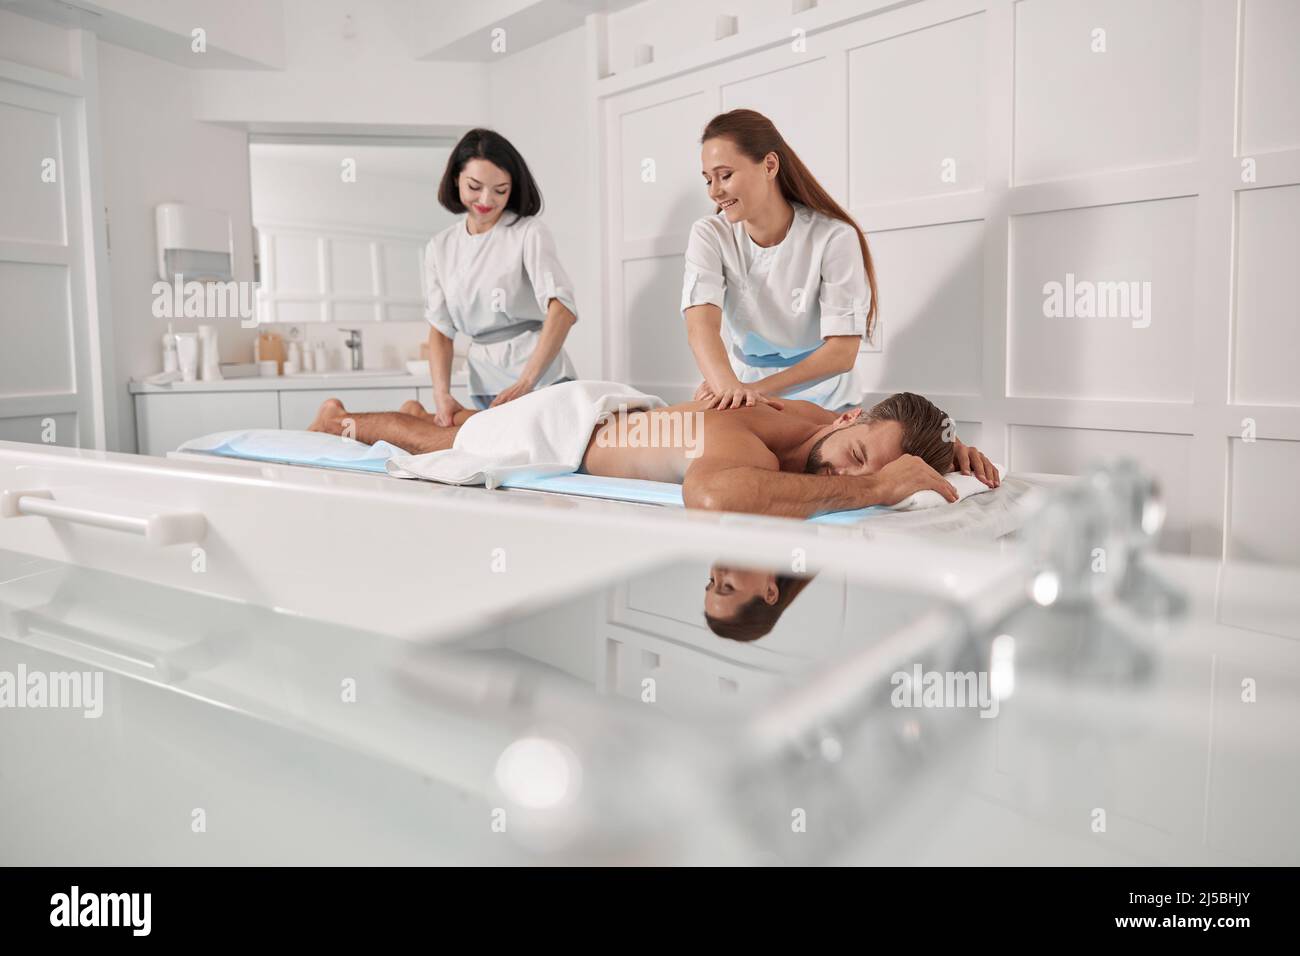 Smiling women in uniforms do massage to middle aged man patient in hospital Stock Photo